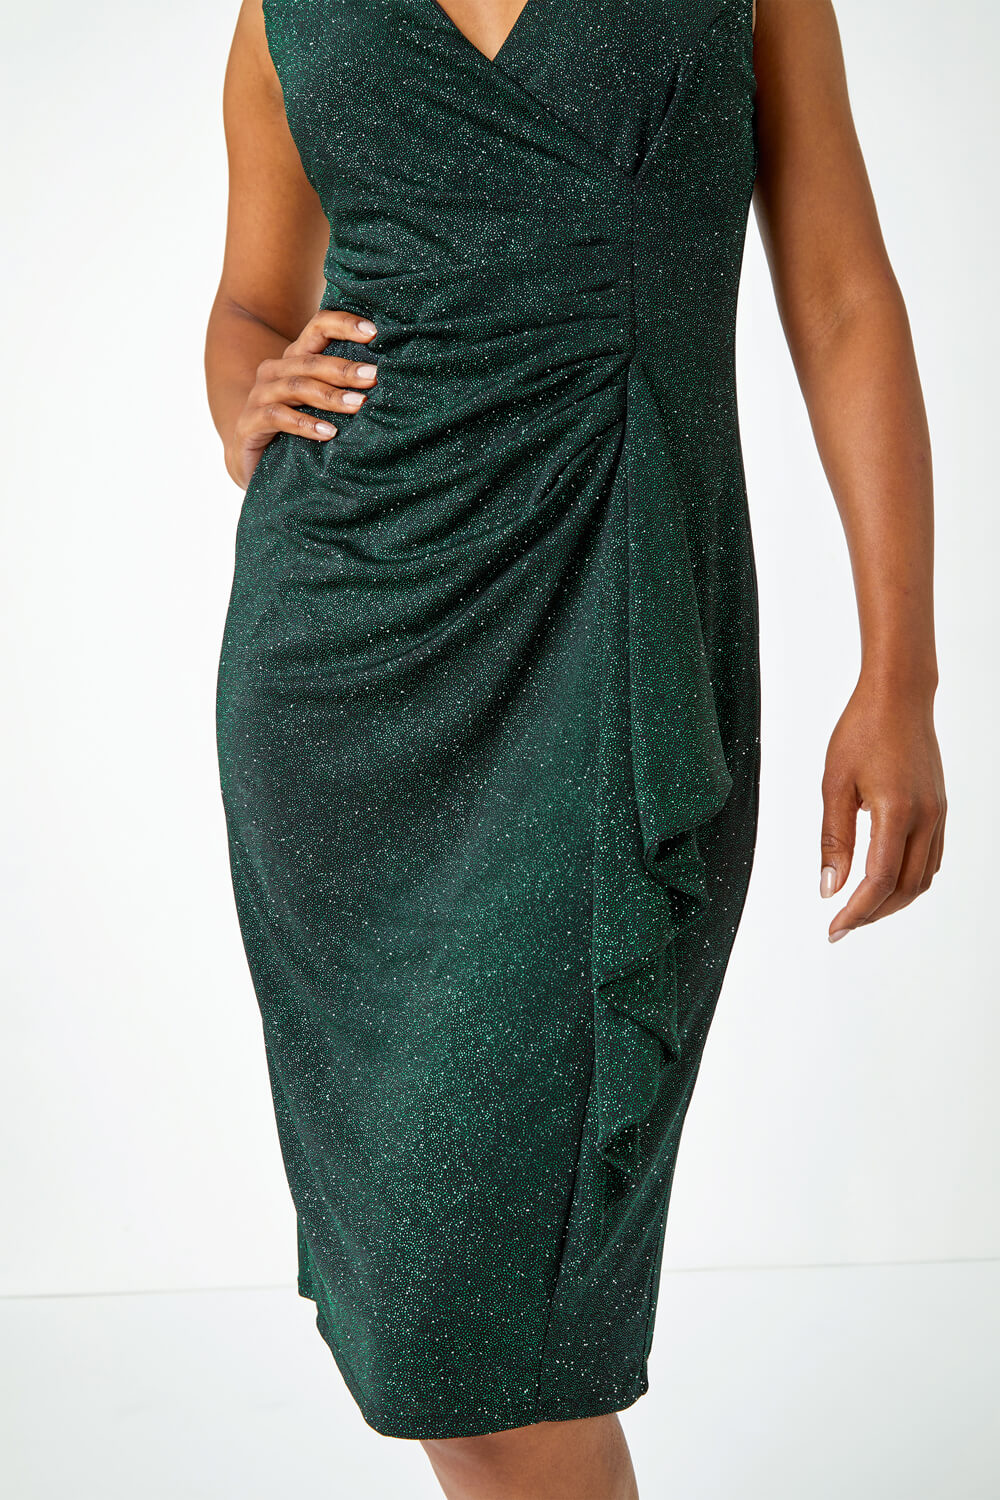 Green Petite Ruched Waterfall Stretch Dress, Image 5 of 5